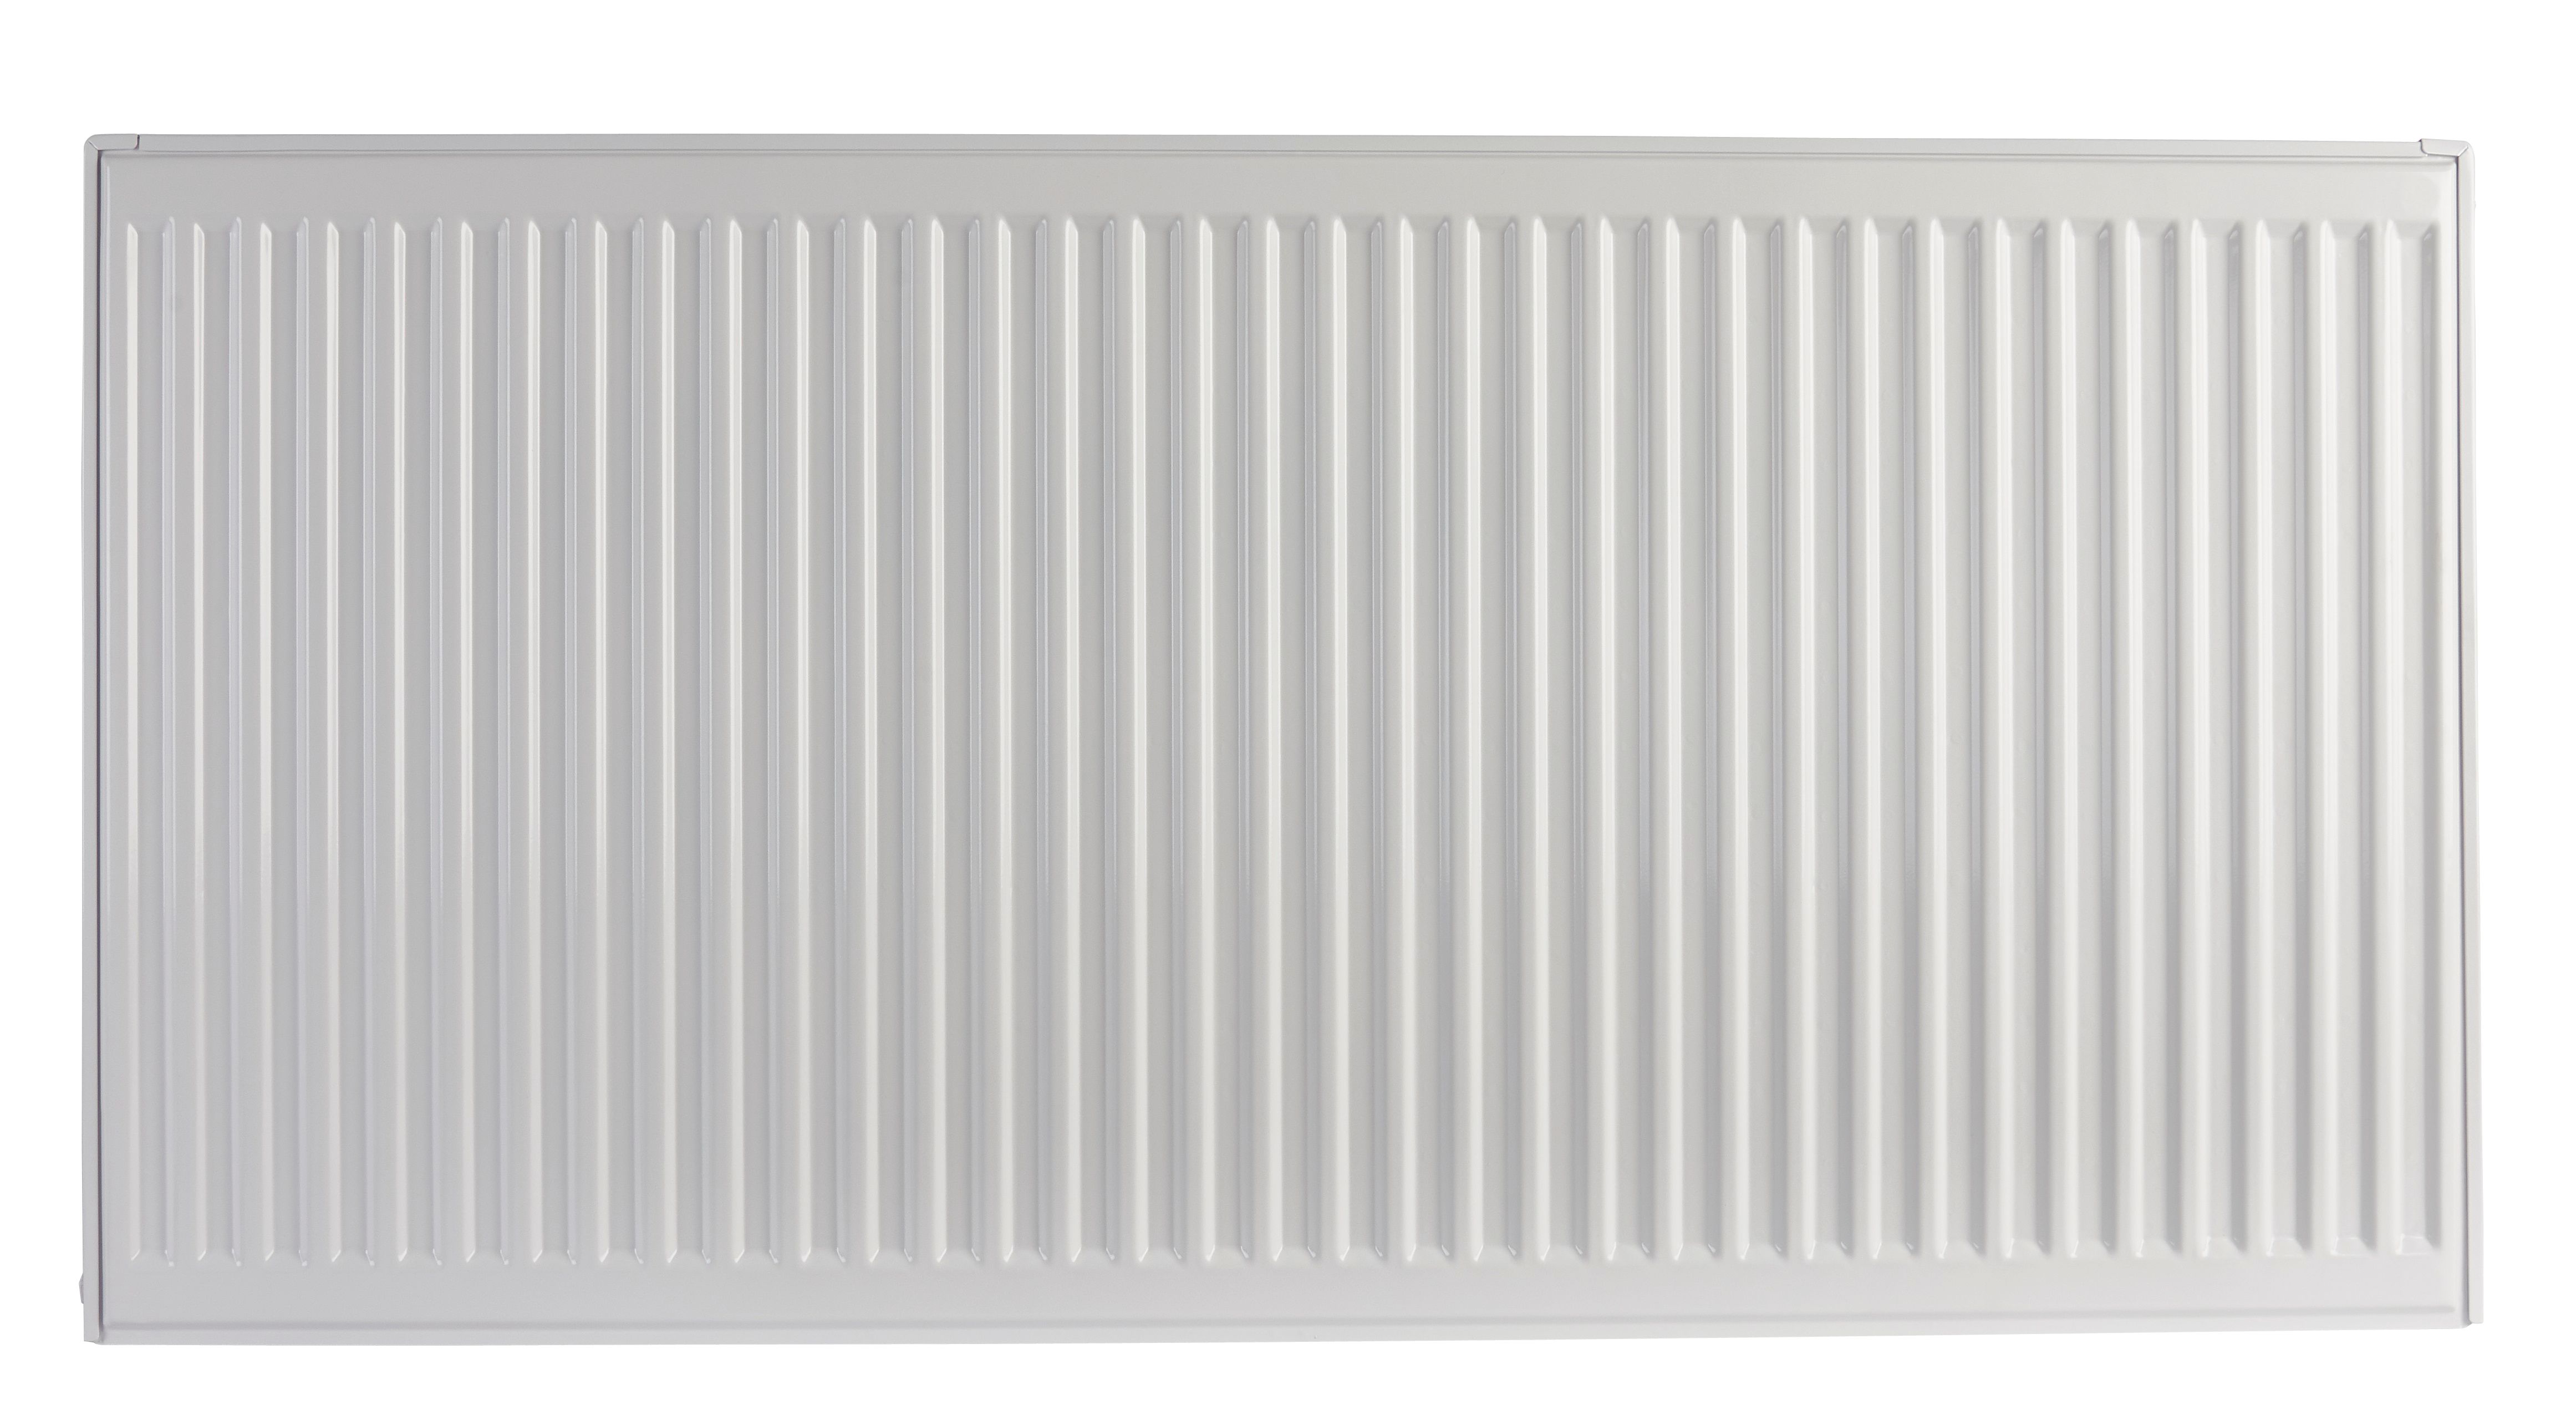 Image of Homeline by Stelrad 600 x 700mm Type 22 Double Panel Premium Double Convector Radiator